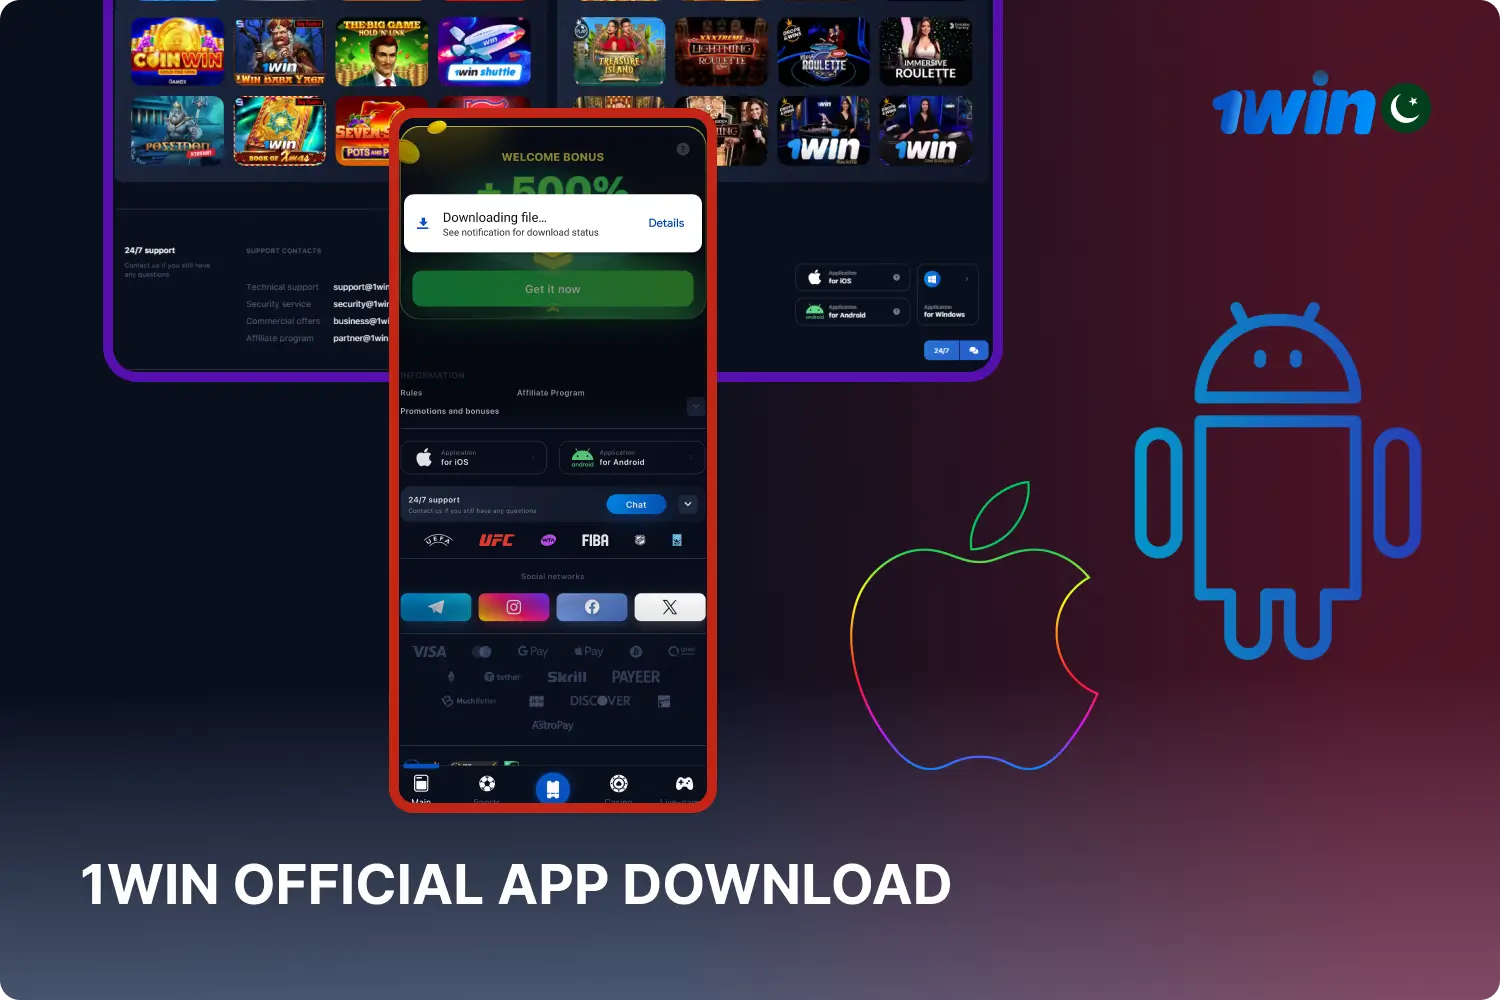 Gamblers in Pakistan can download the 1win mobile app for Android and iOS and comfortably play casinos and place sports bets anywhere